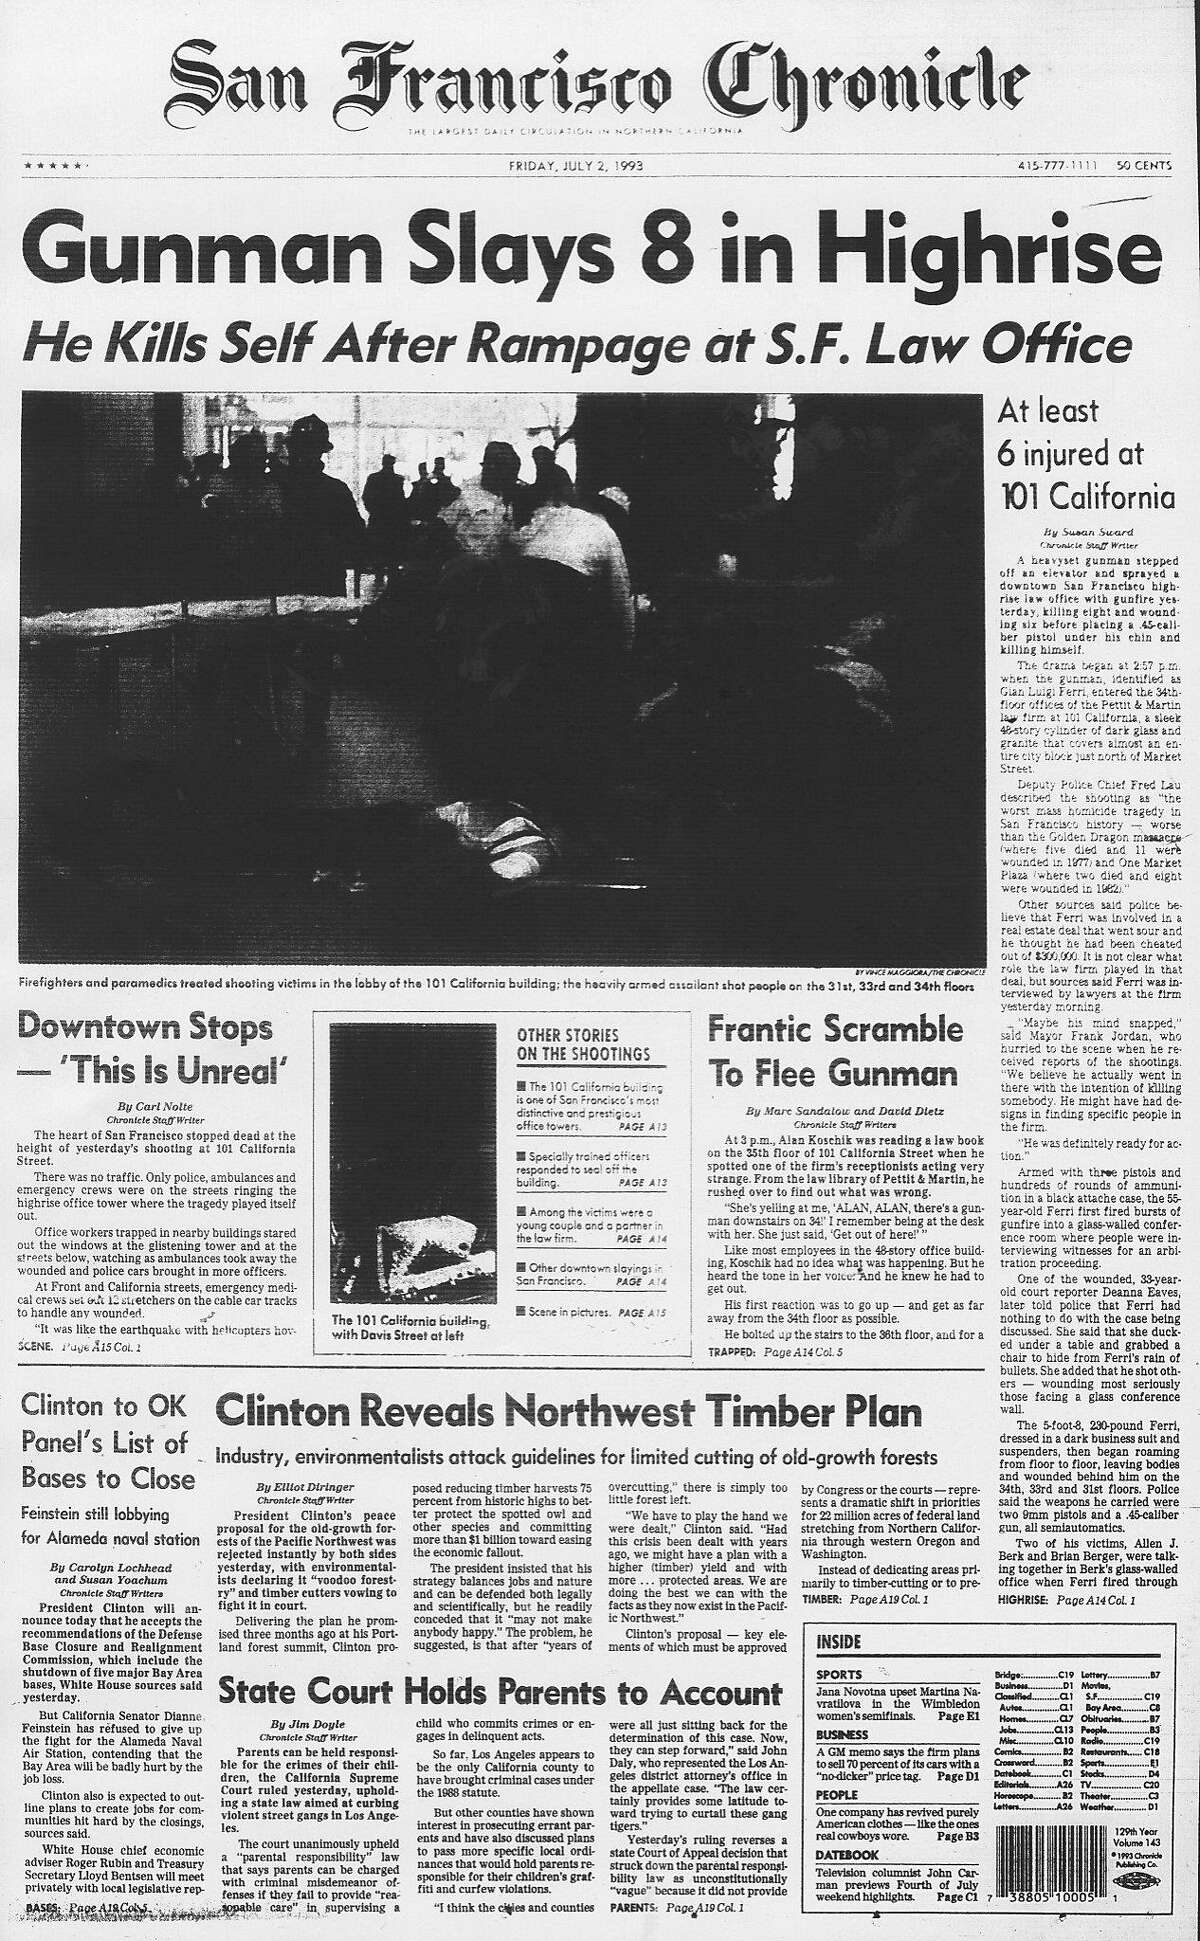 Historic Chronicle Front Page July 02, 1993 front page Gunman kill 8 in 101 California highrise Chron365, Chroncover